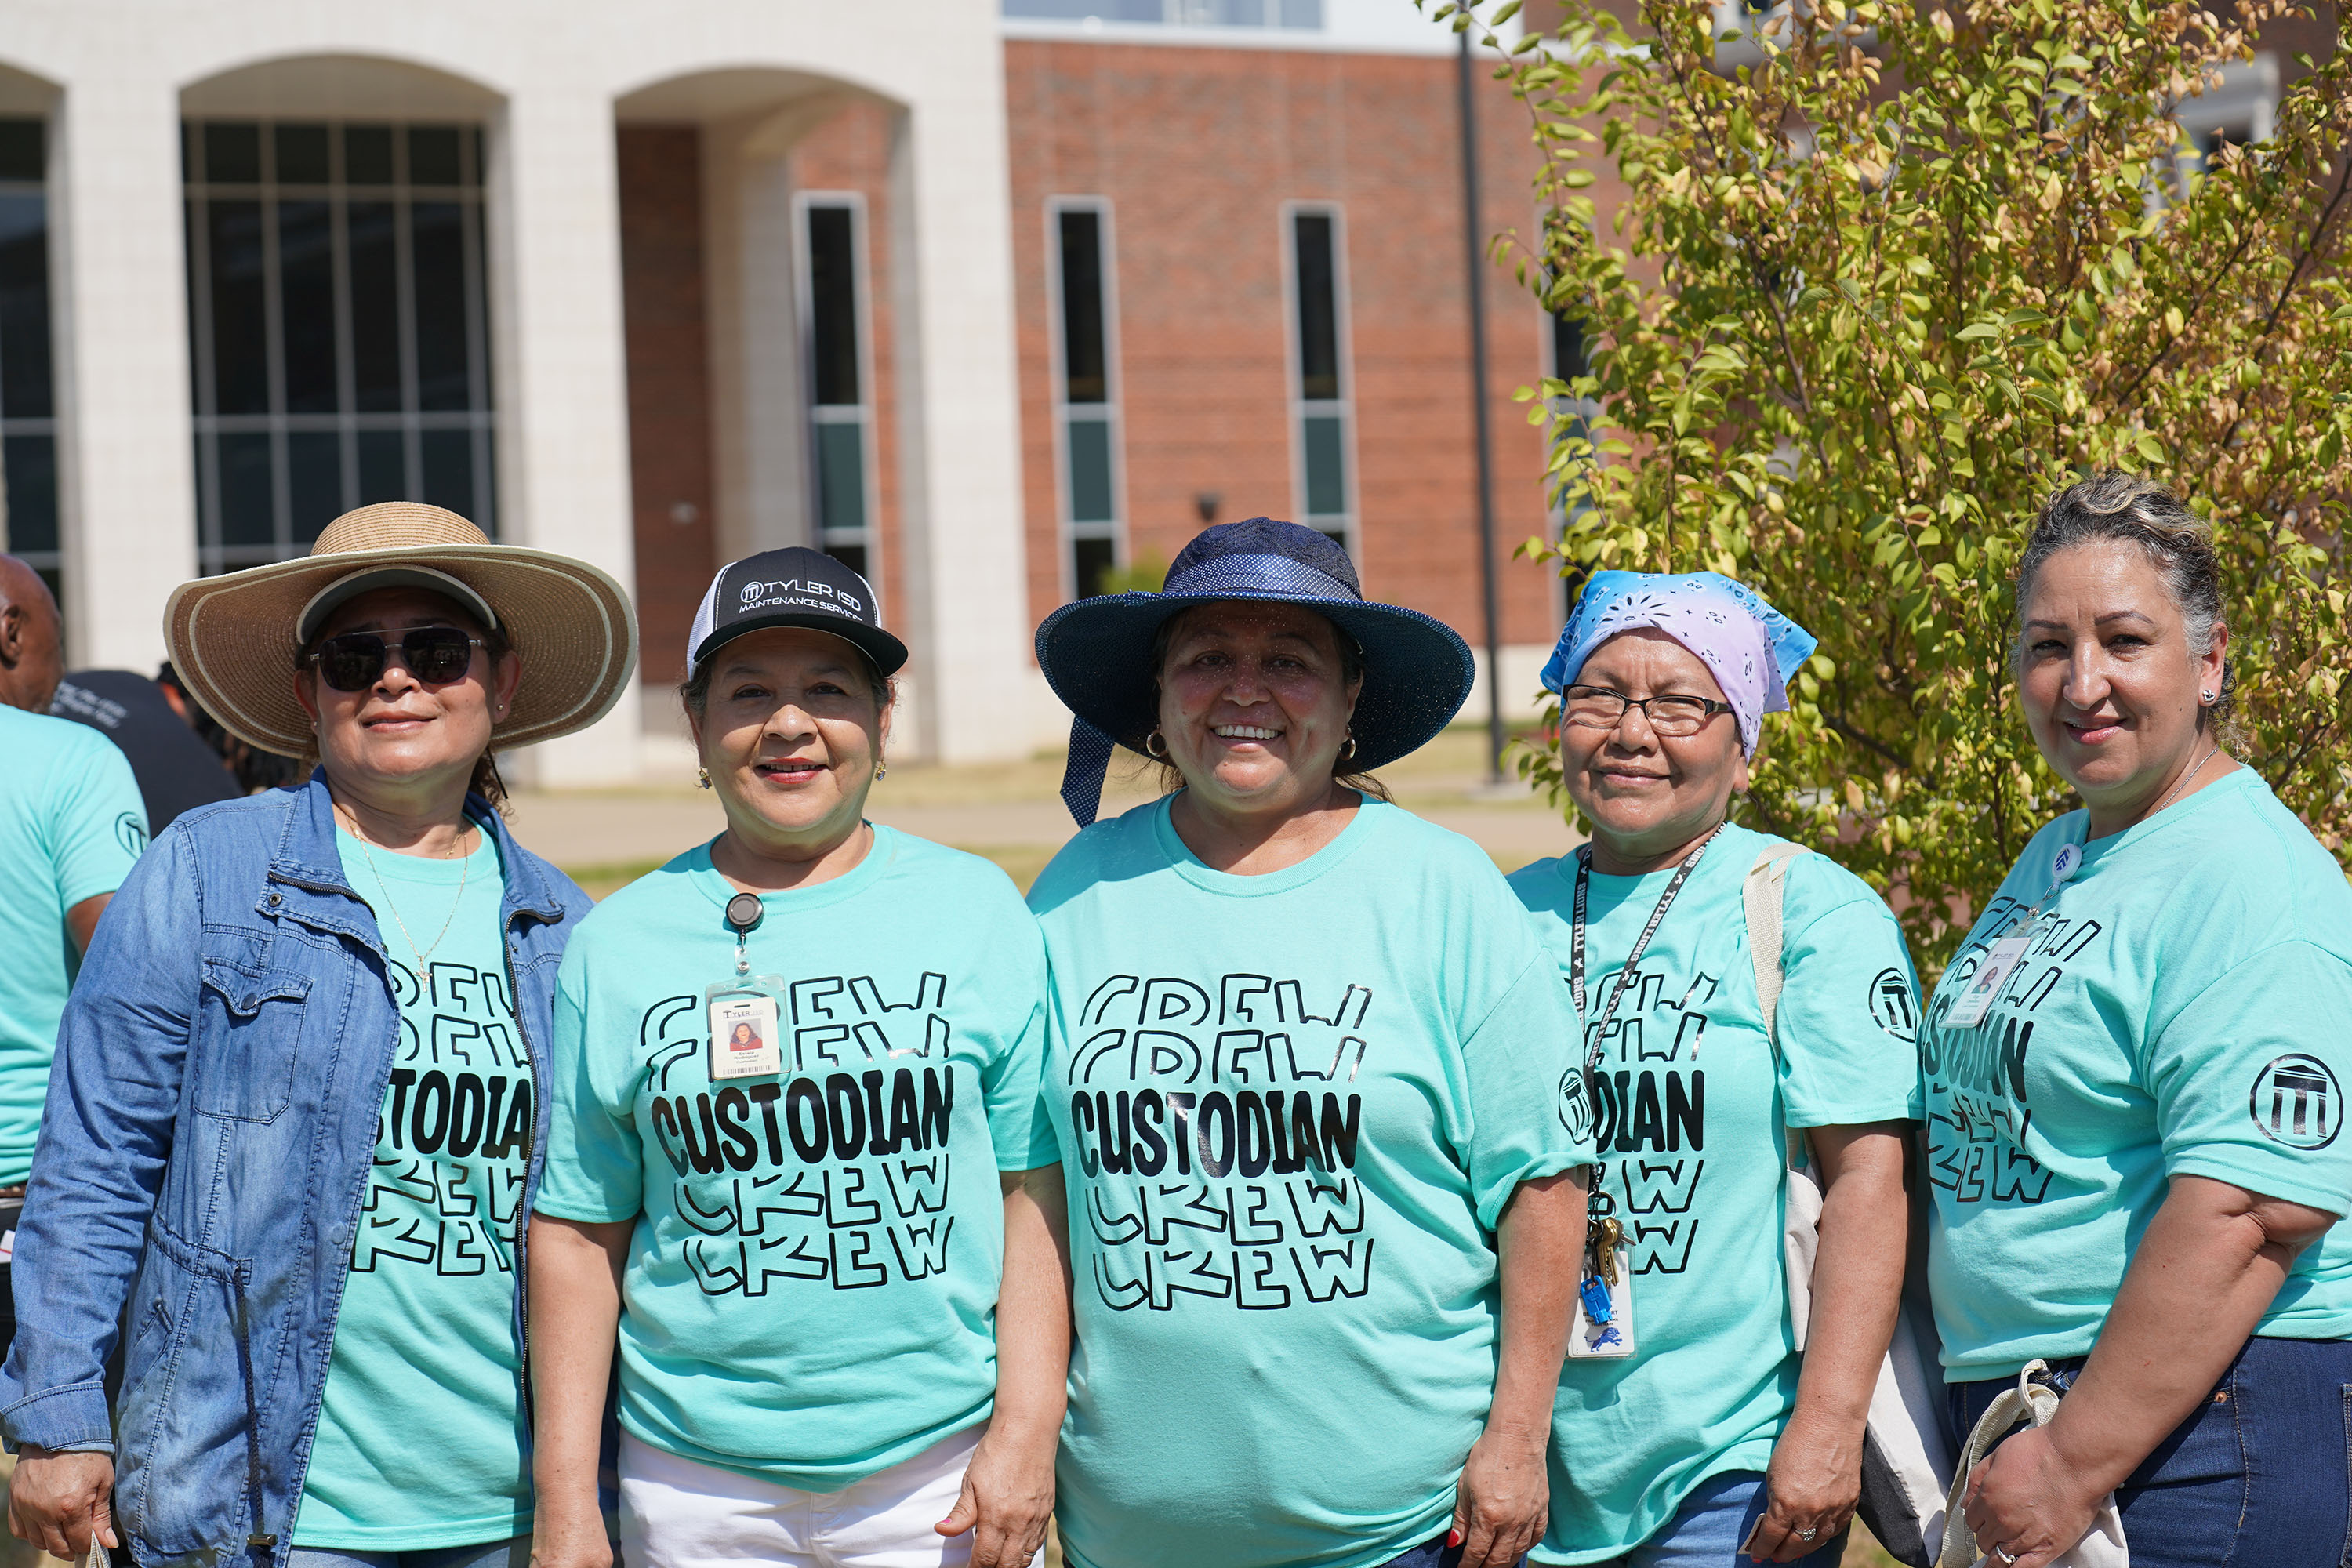 women wearing teal green t-shirts stand in front of a school